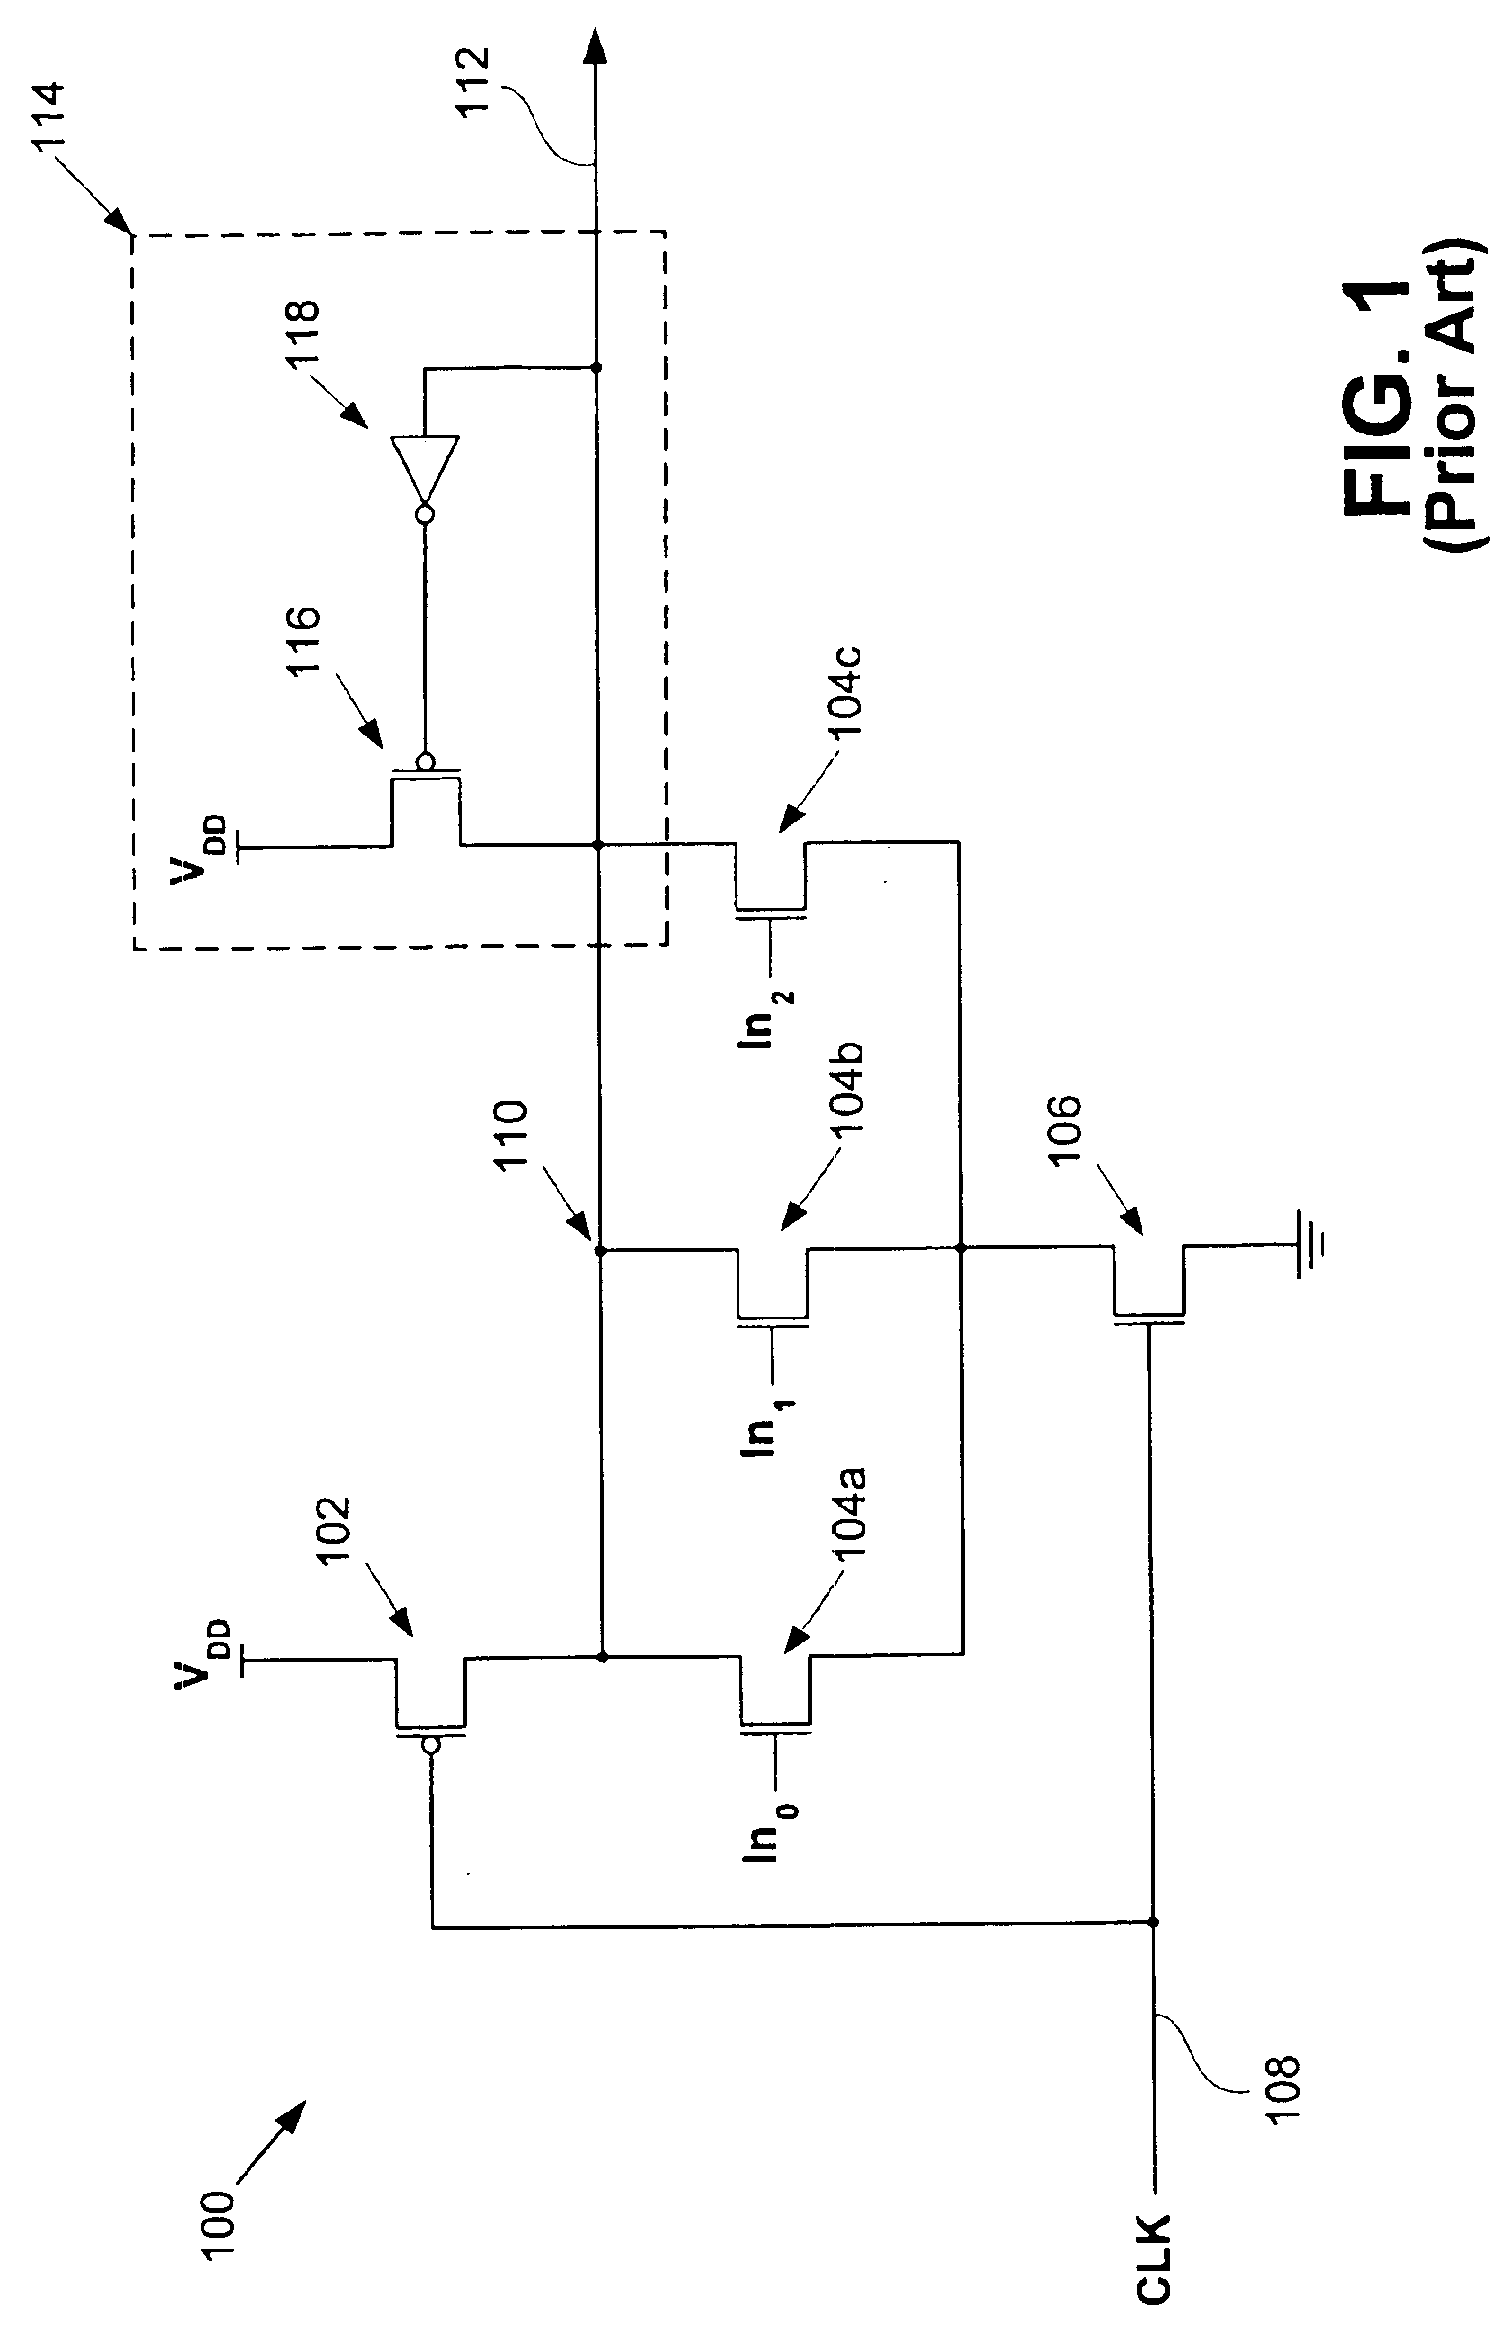 Adaptive keeper sizing for dynamic circuits based on fused process corner data